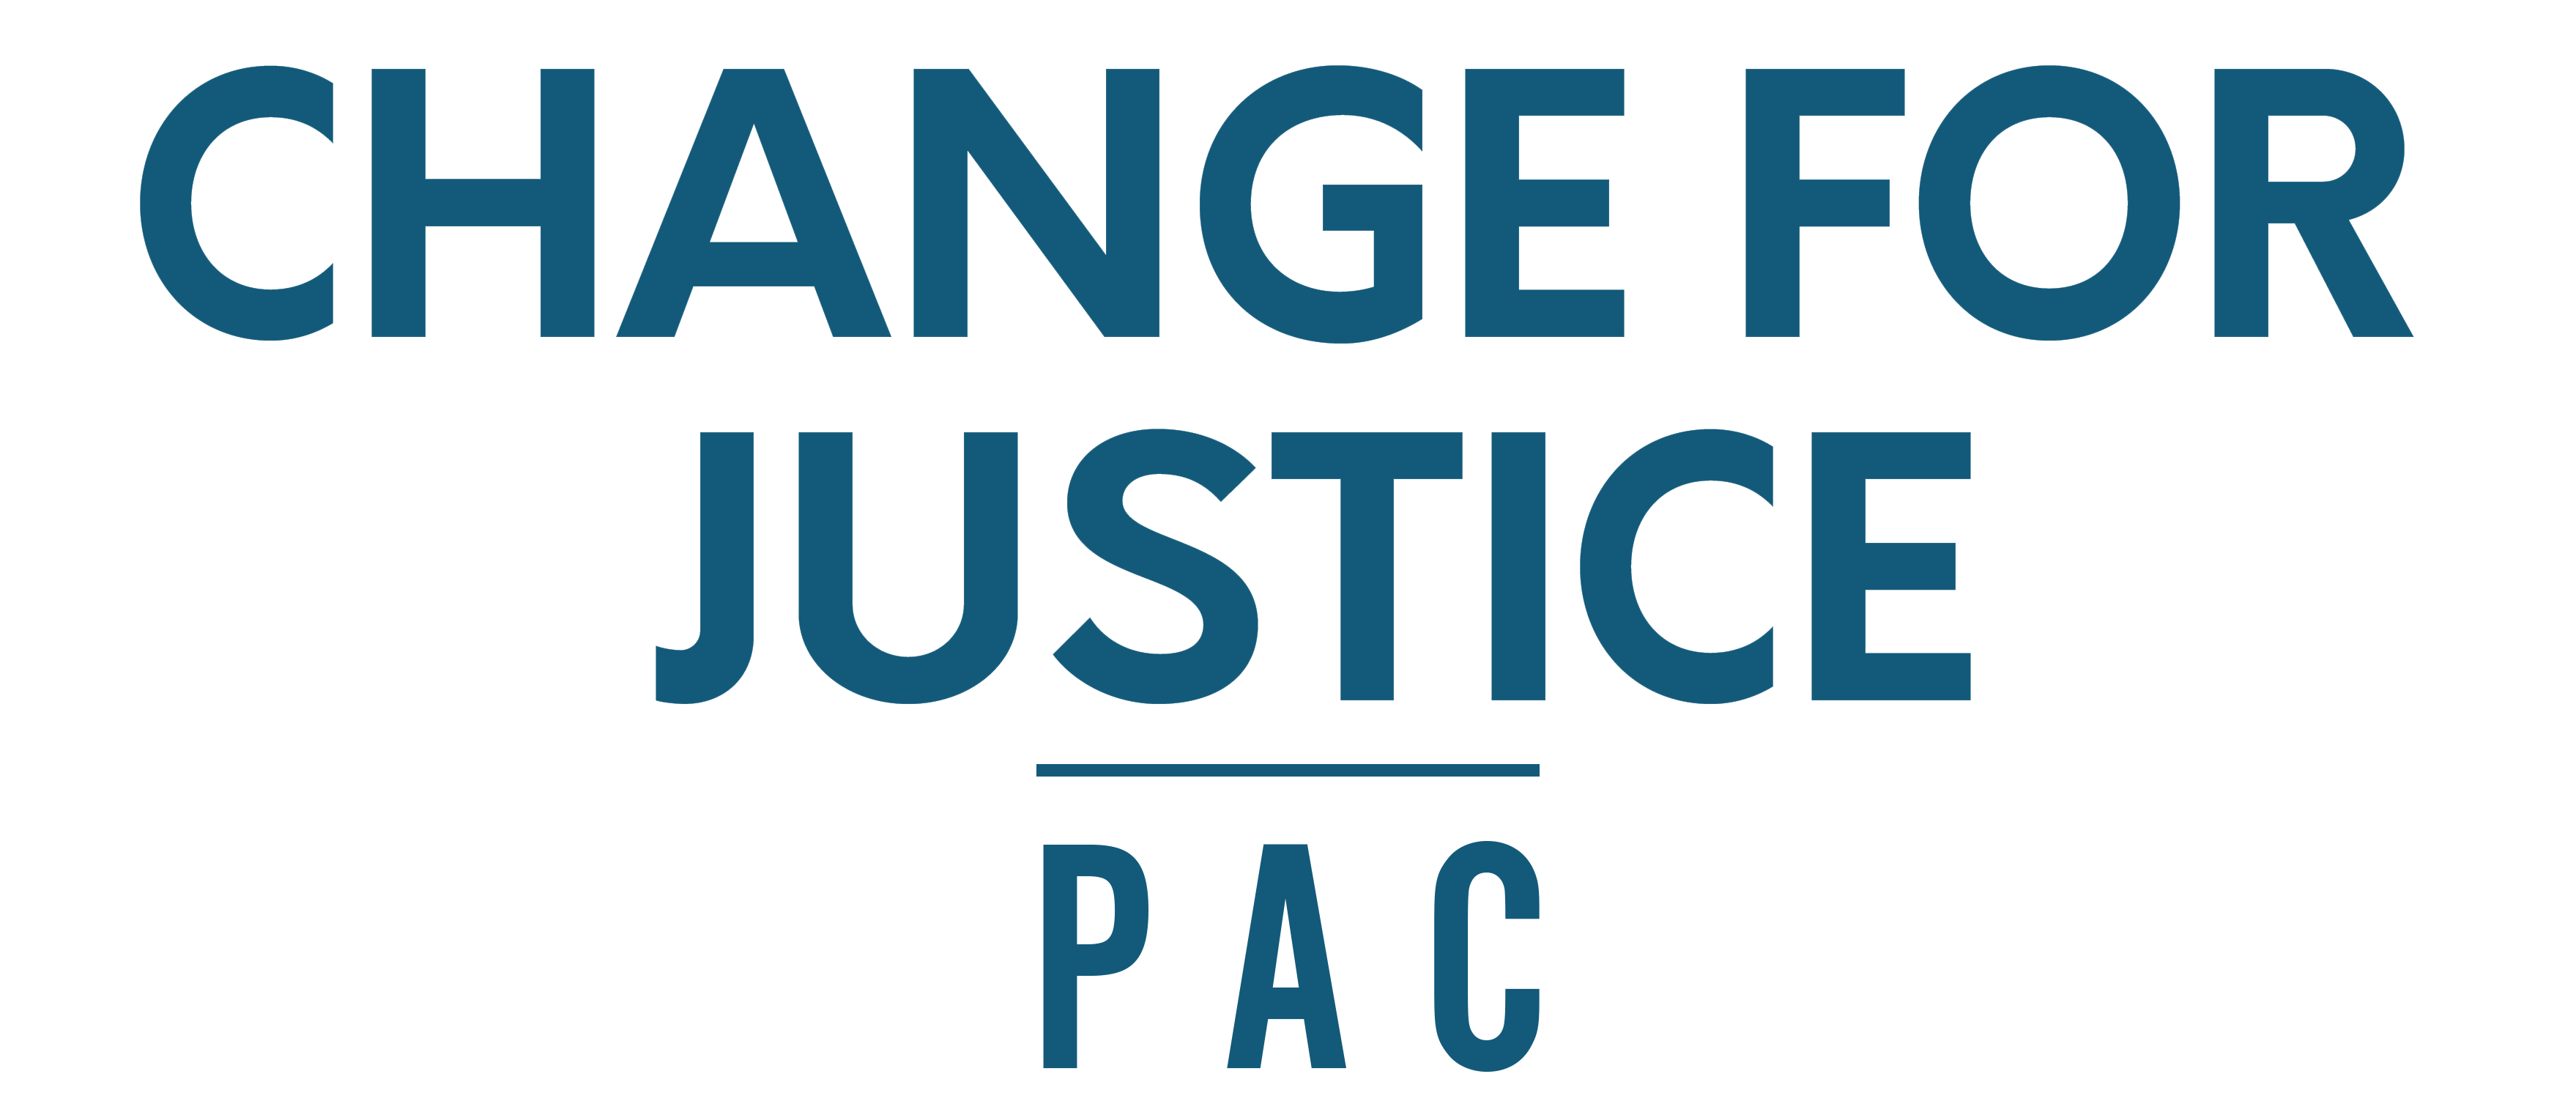 Change For Justice PAC